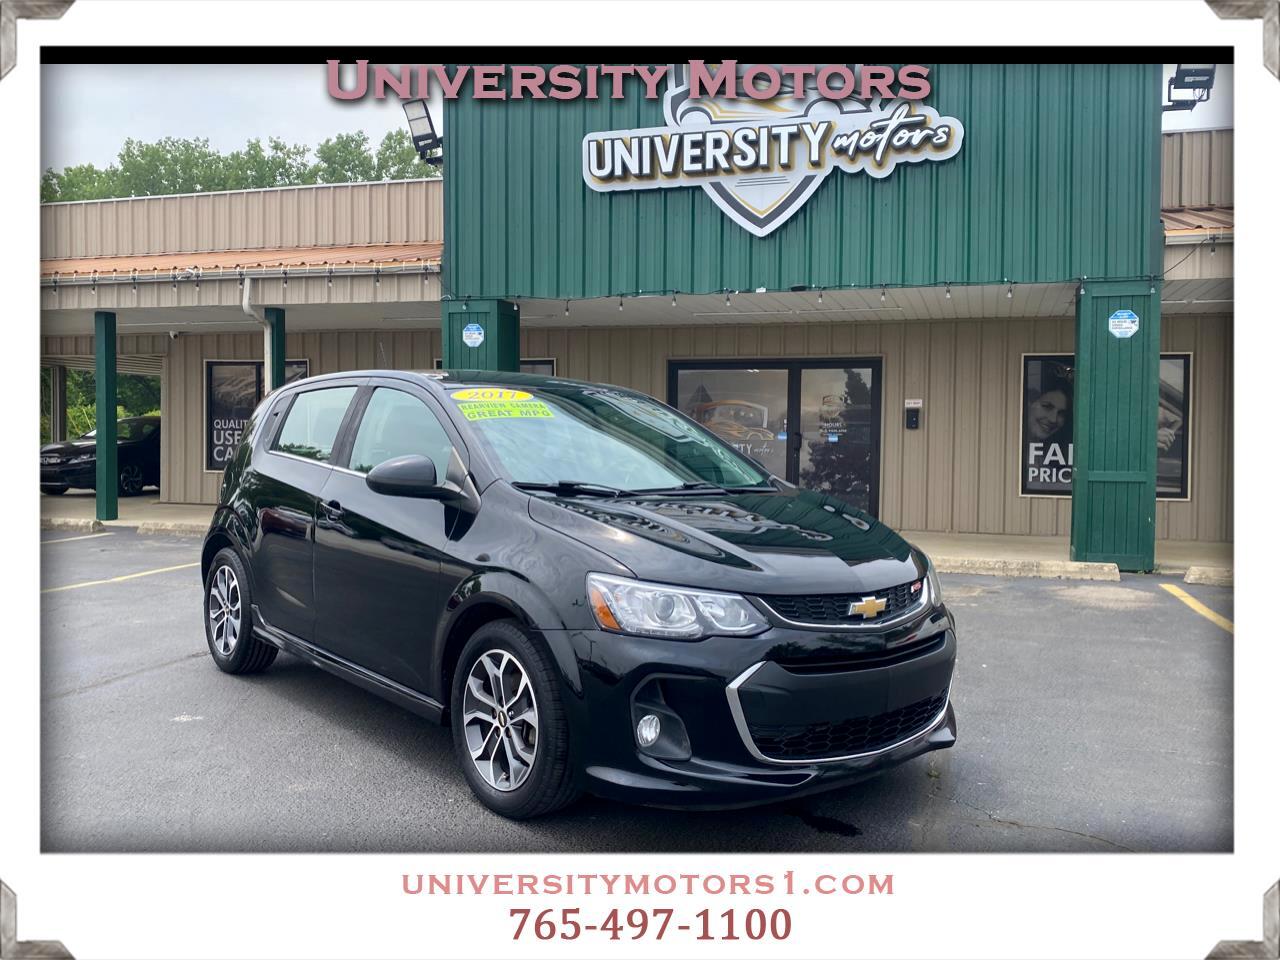 2017 Chevrolet Sonic LT Automatic 5 Door RS Package